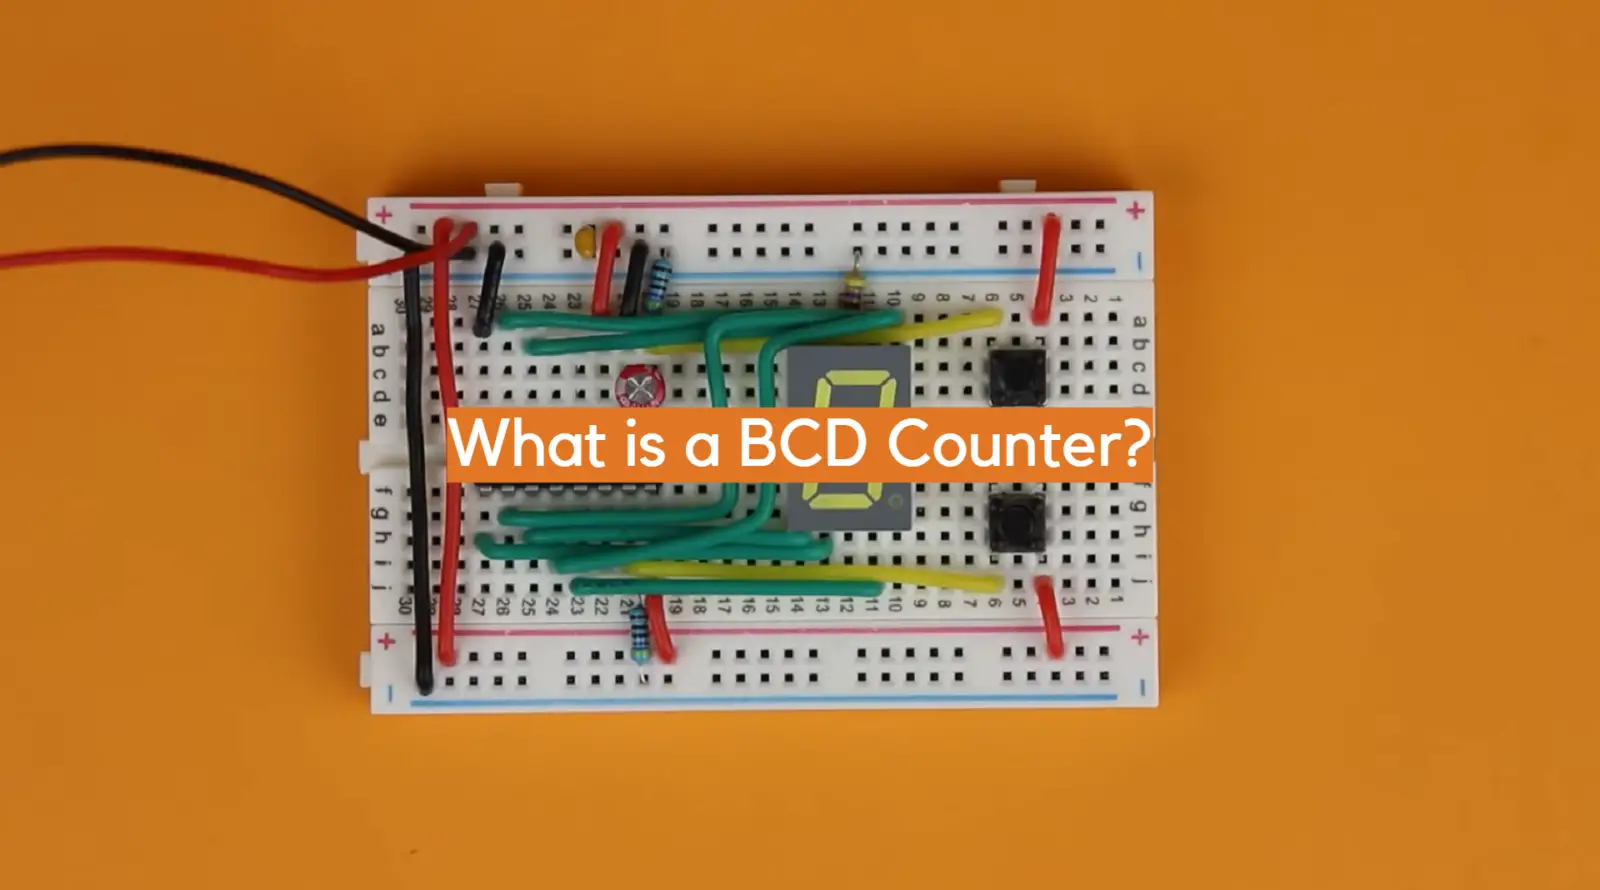 What is a BCD Counter?